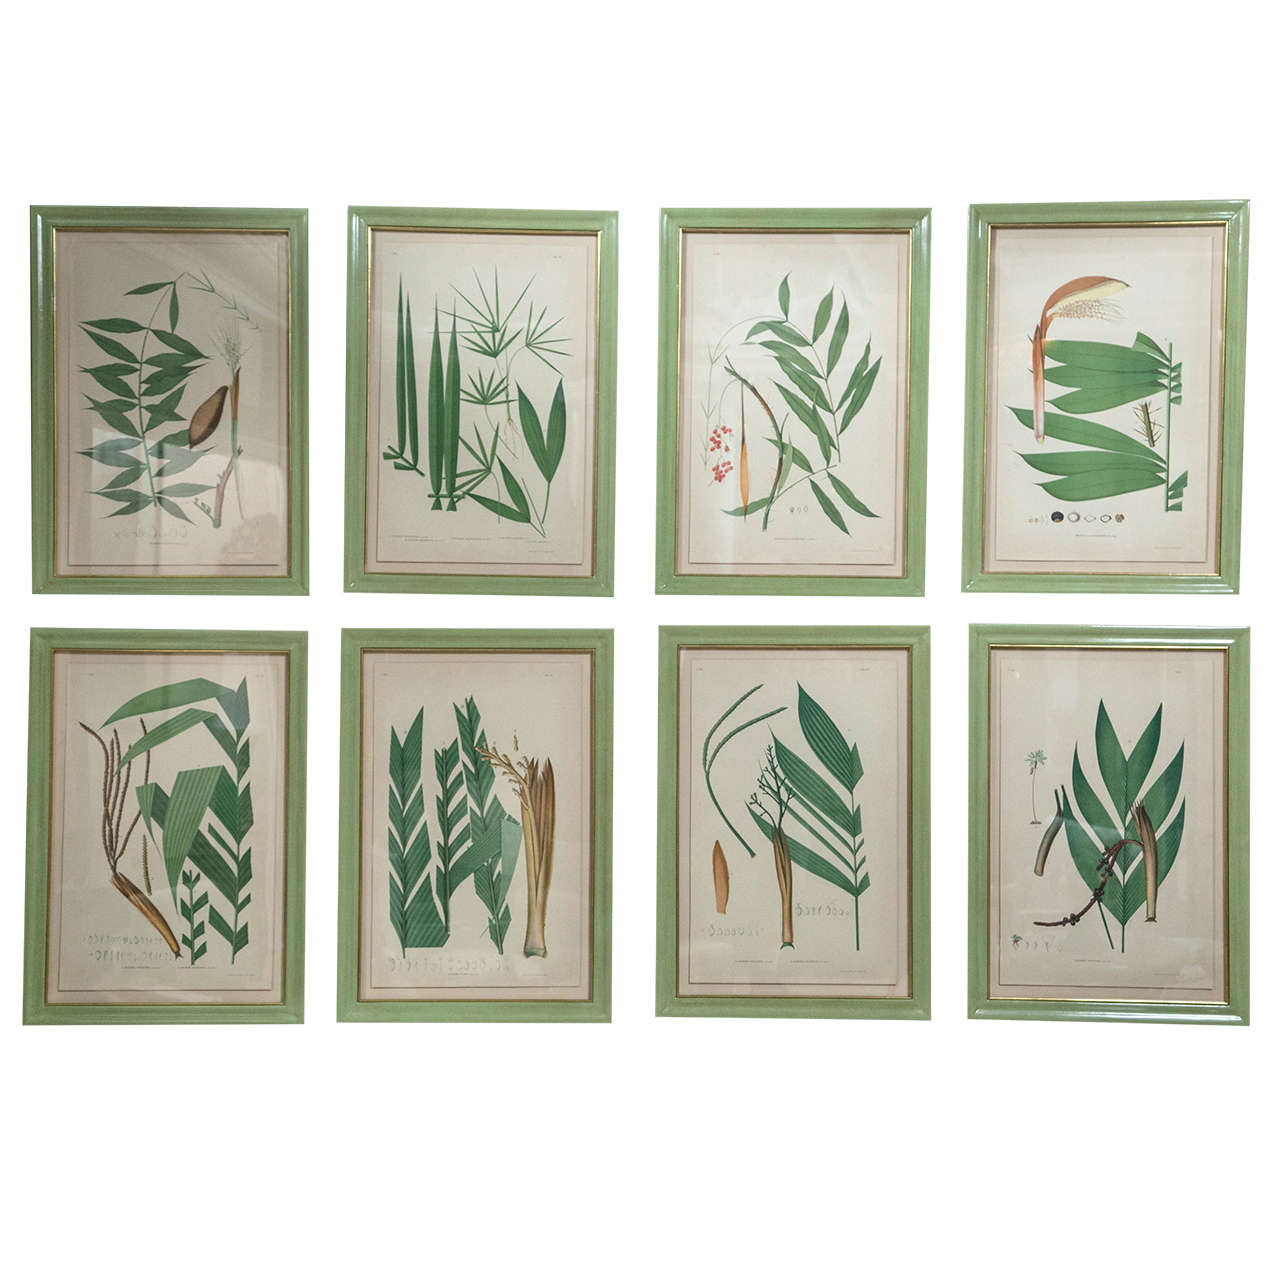 Eight chromolithograph studies of Brazilian palm culture by Joao Rodrigues.  Custom framed in archival materials.
Can be sold individually at $ 1,900 each.